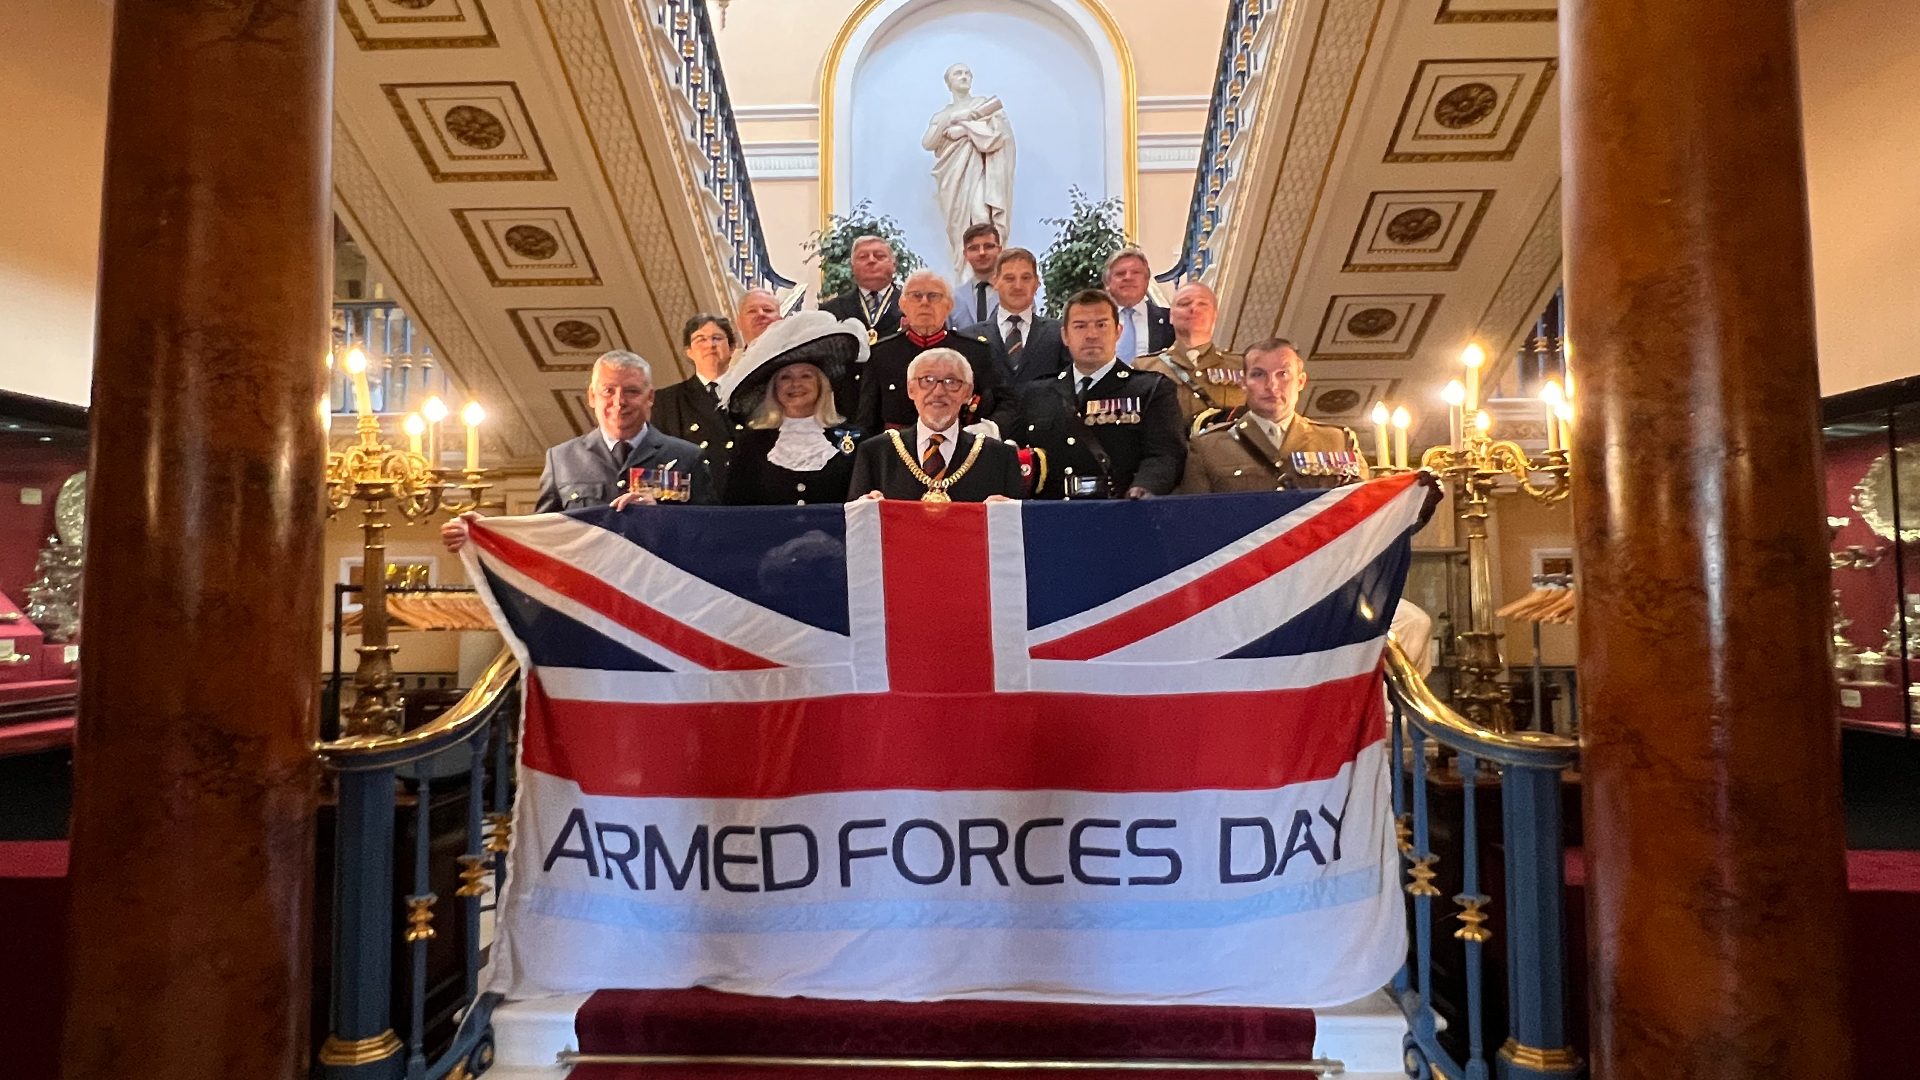 armed forces day flag held up by lord mayor and service personnel on the steps inside liverpool town hall